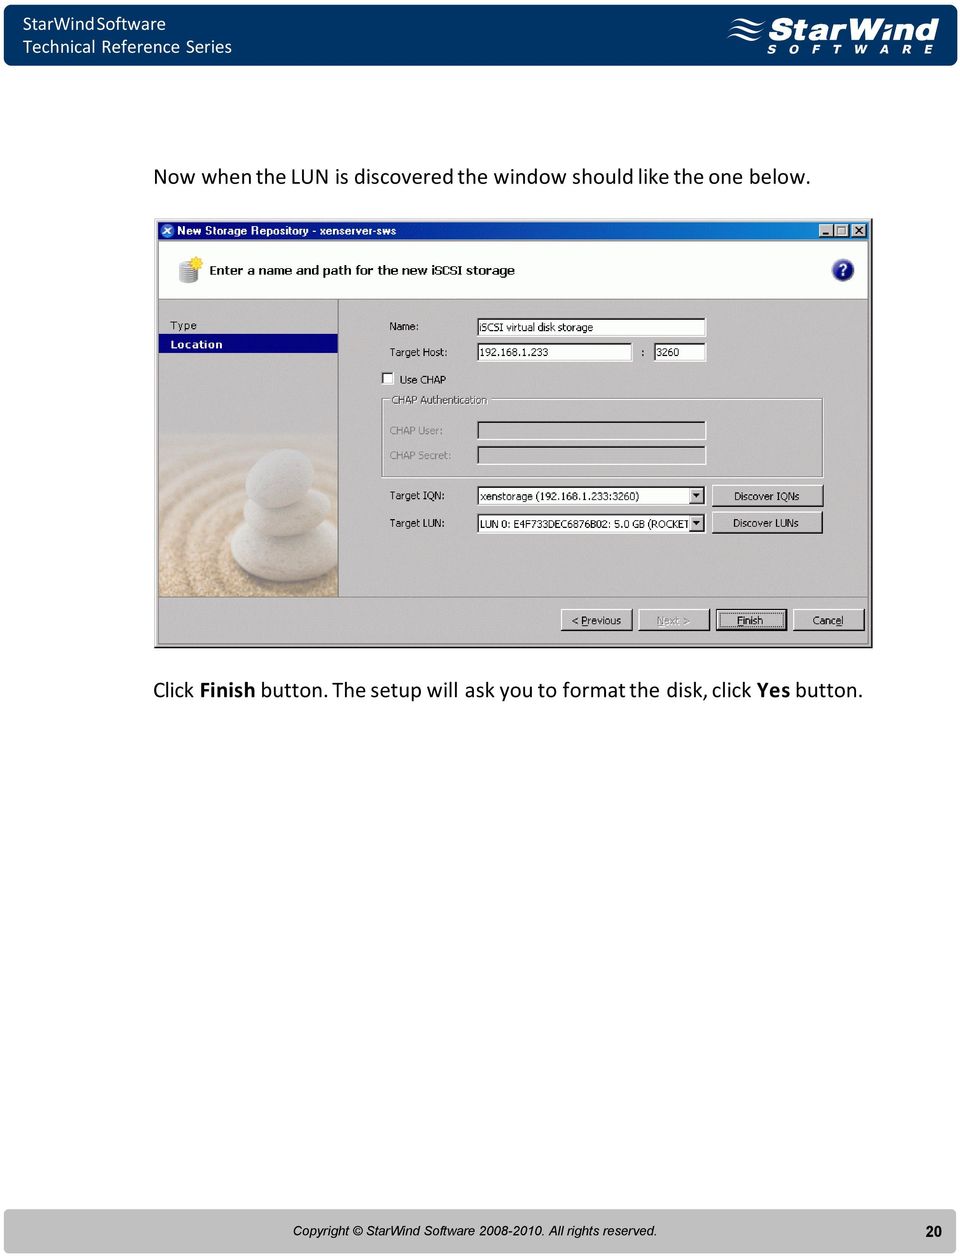 The setup will ask you to format the disk, click